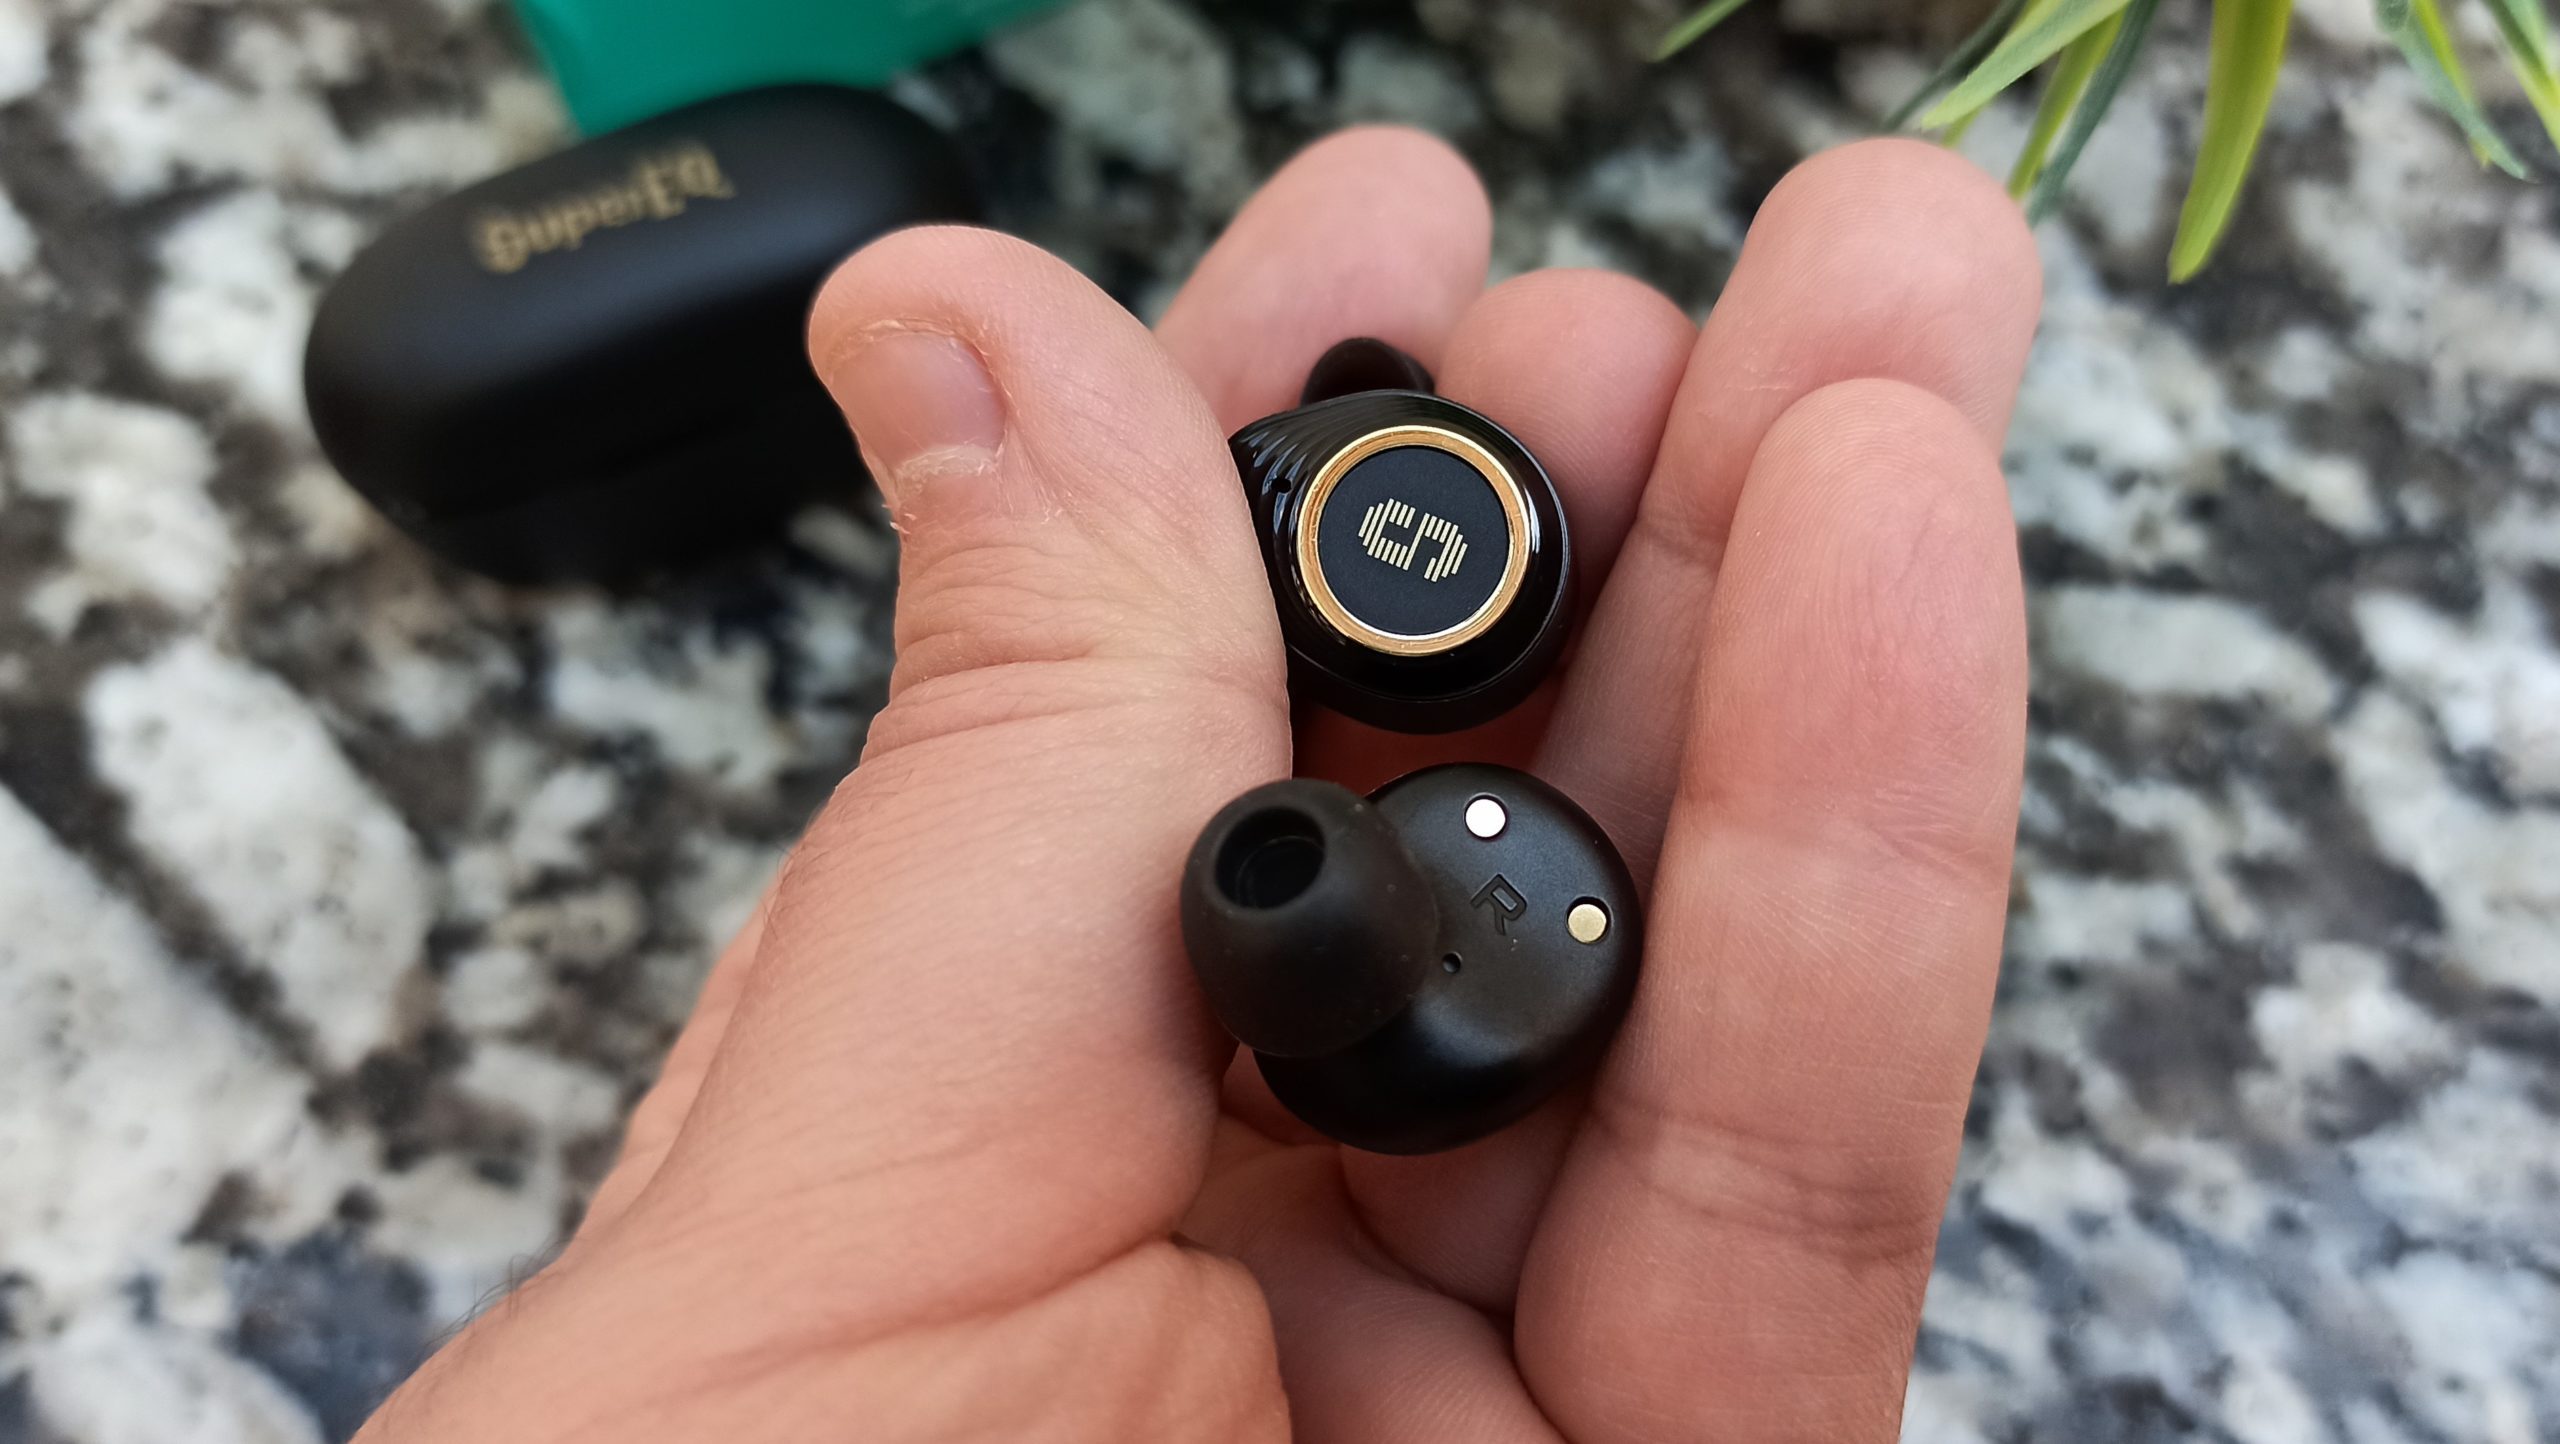 SuperEQ Q2 Pro Earbuds Review